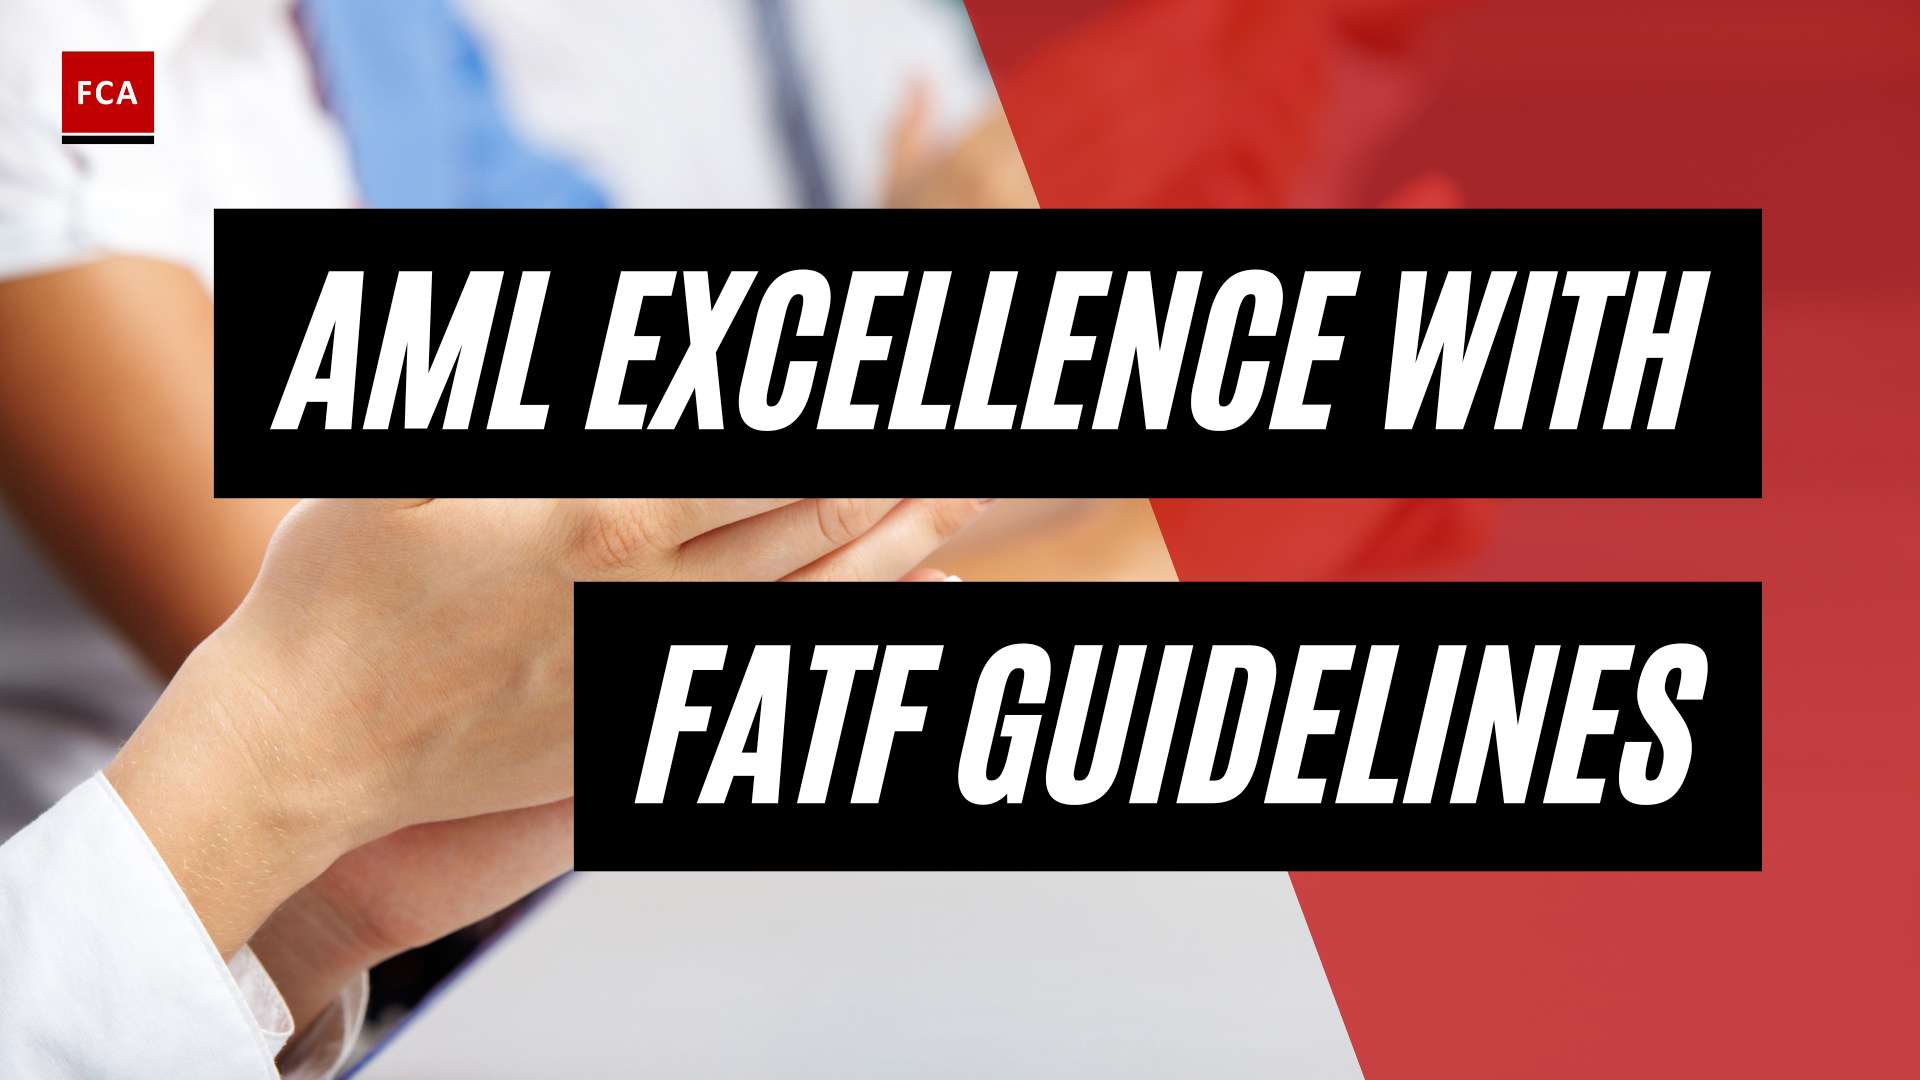 Achieving Aml Excellence: Following Fatf Recommendations For Correspondent Banking